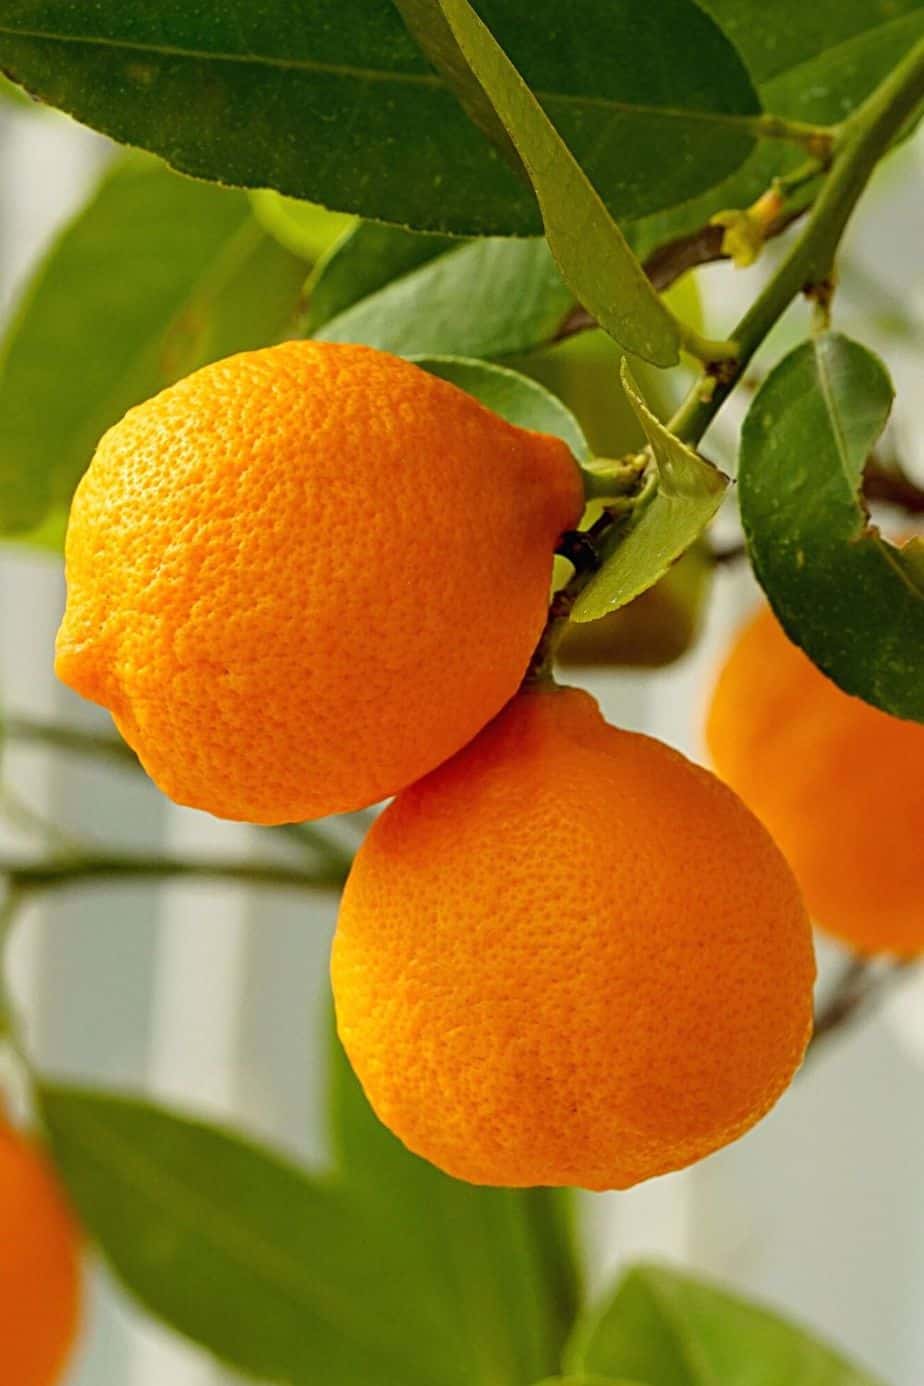 Oranges are one of the citrus plants that you can grow on your south-facing balcony